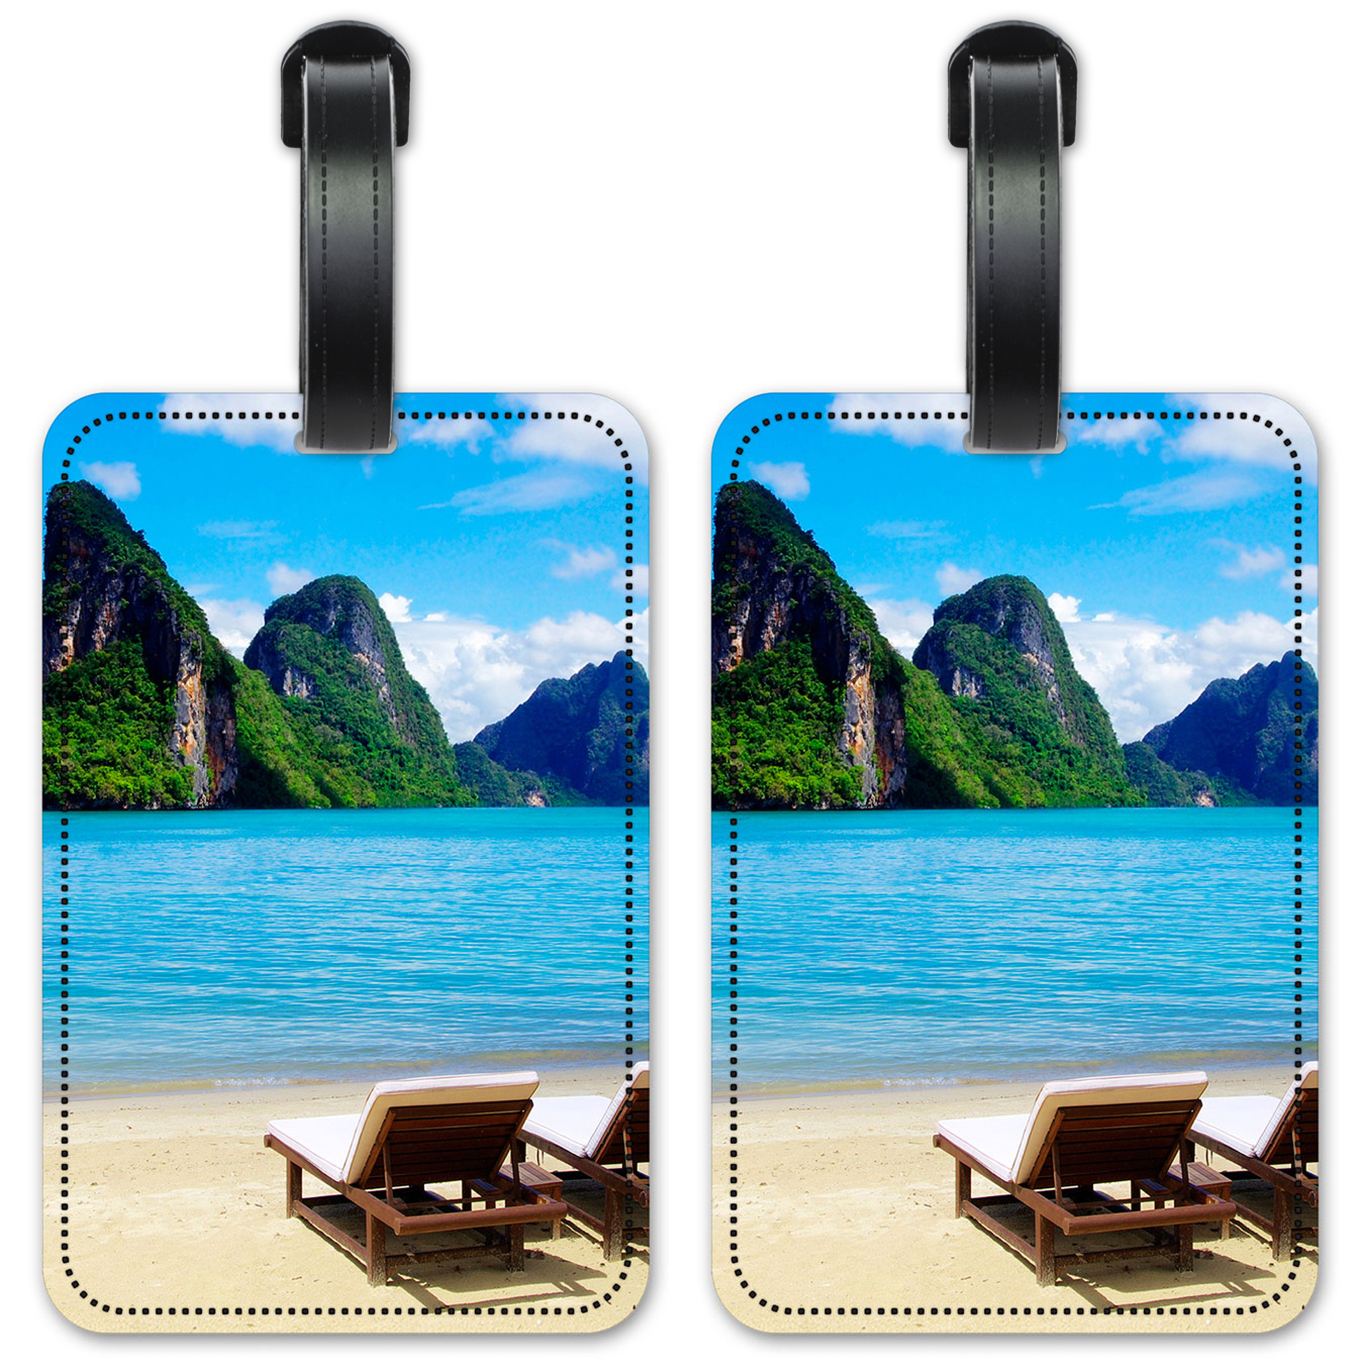 Lounge Chairs on the Beach - #2843